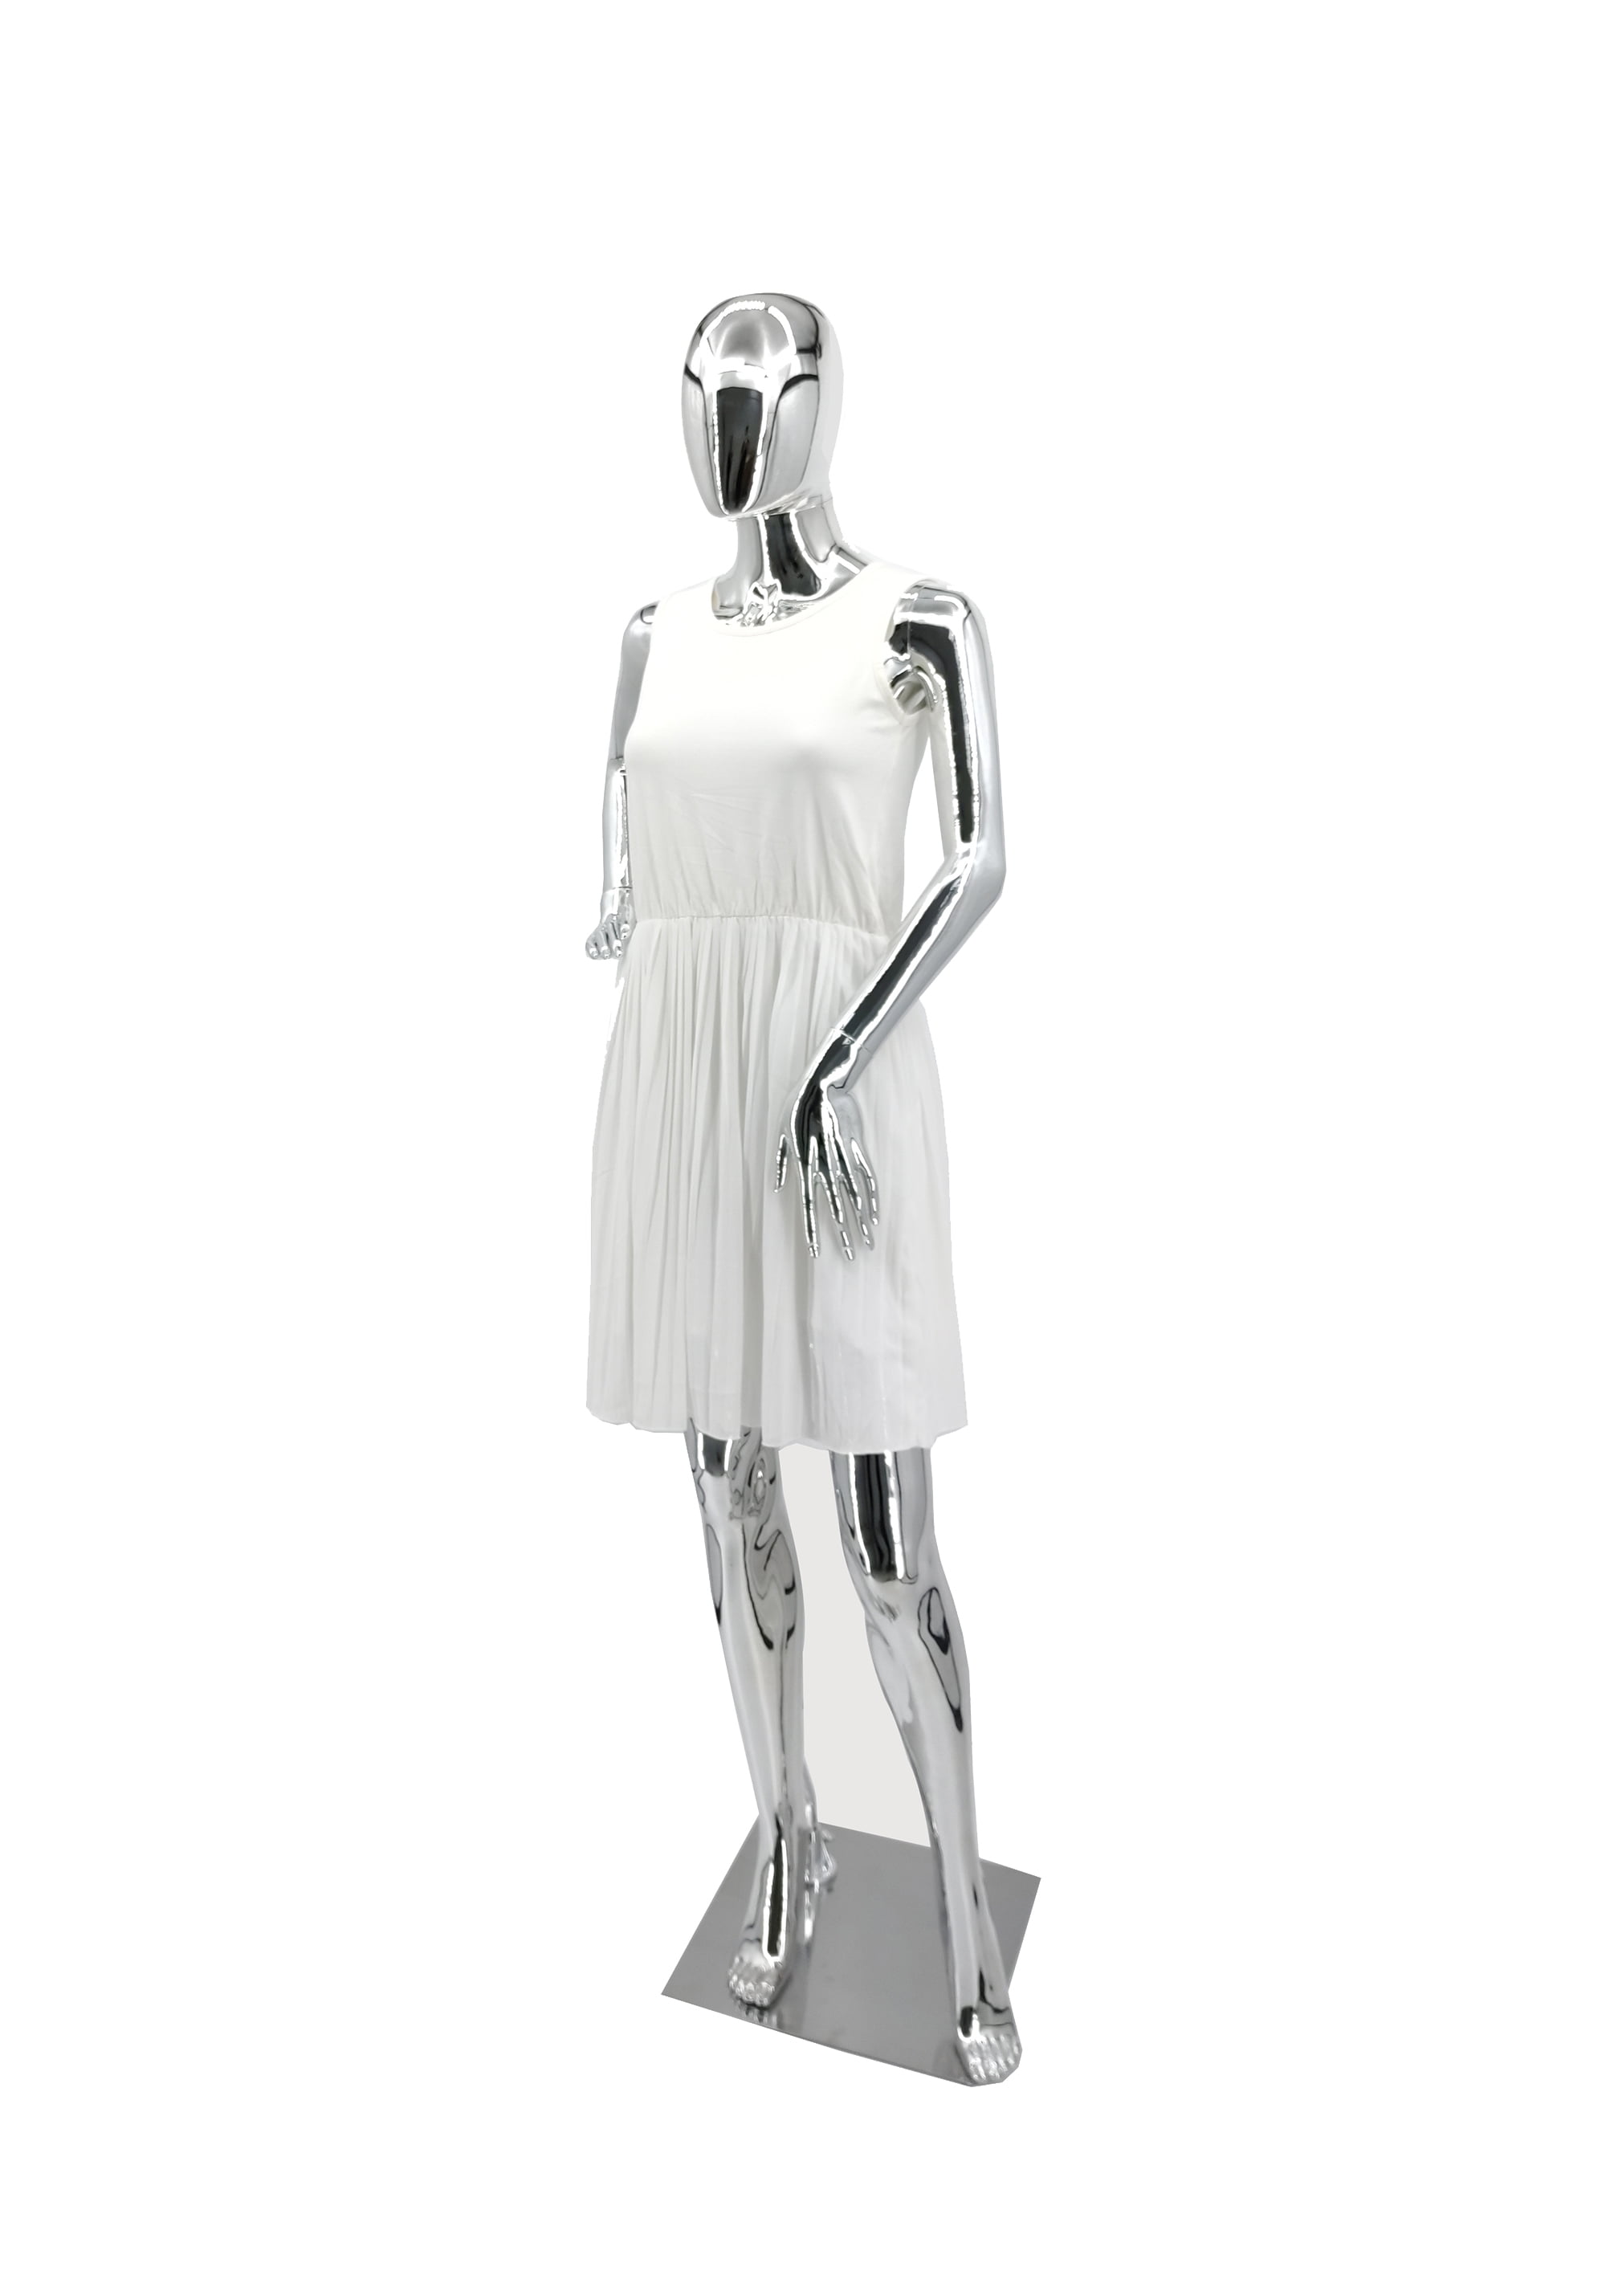 Full Body Glossy Female Mannequin Pose 3, Display Warehouse